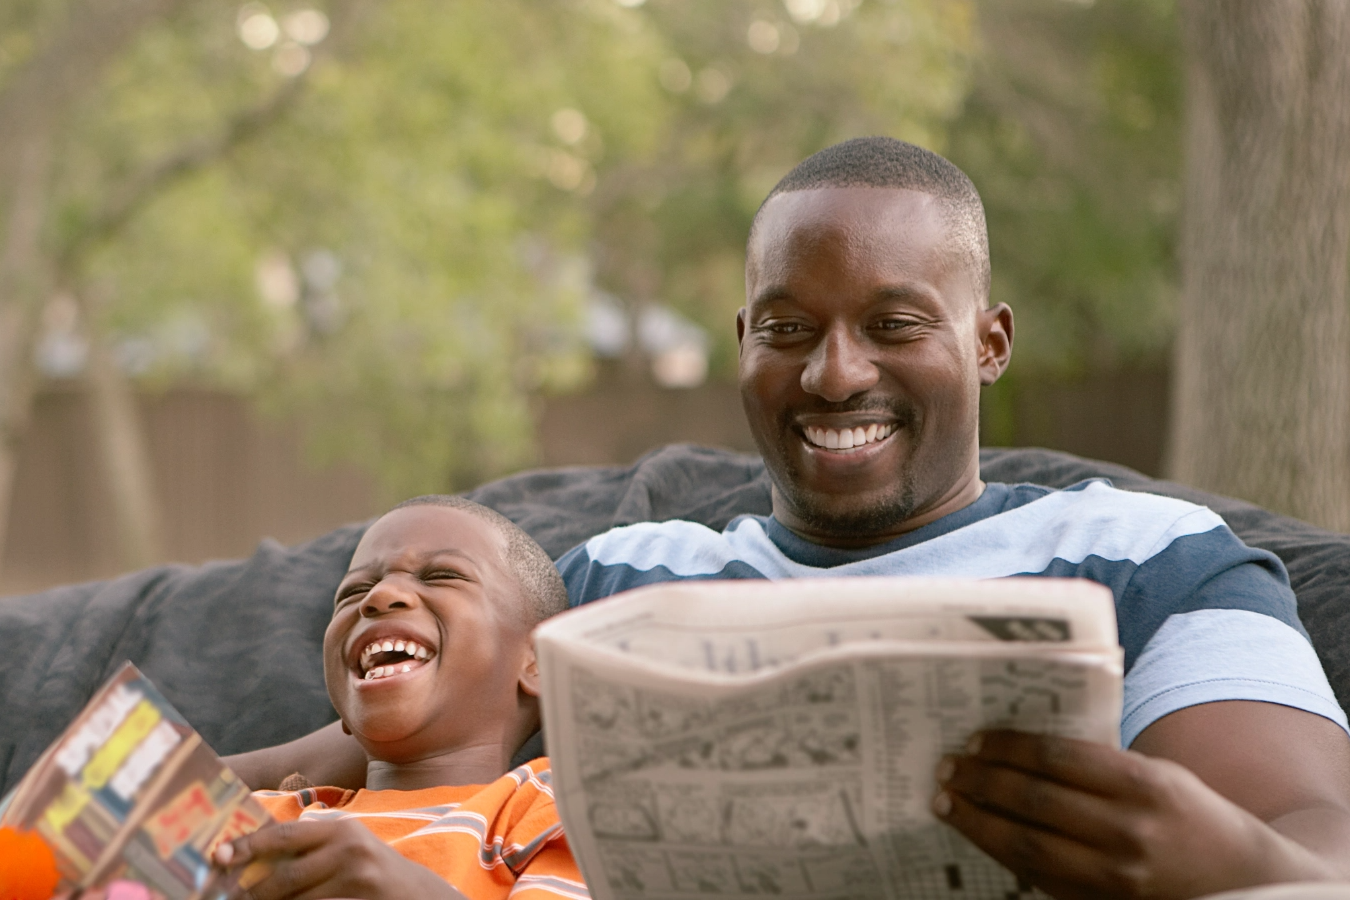 A man, holding a newspaper, and a boy, holding a library book, sit next to each other and laugh.